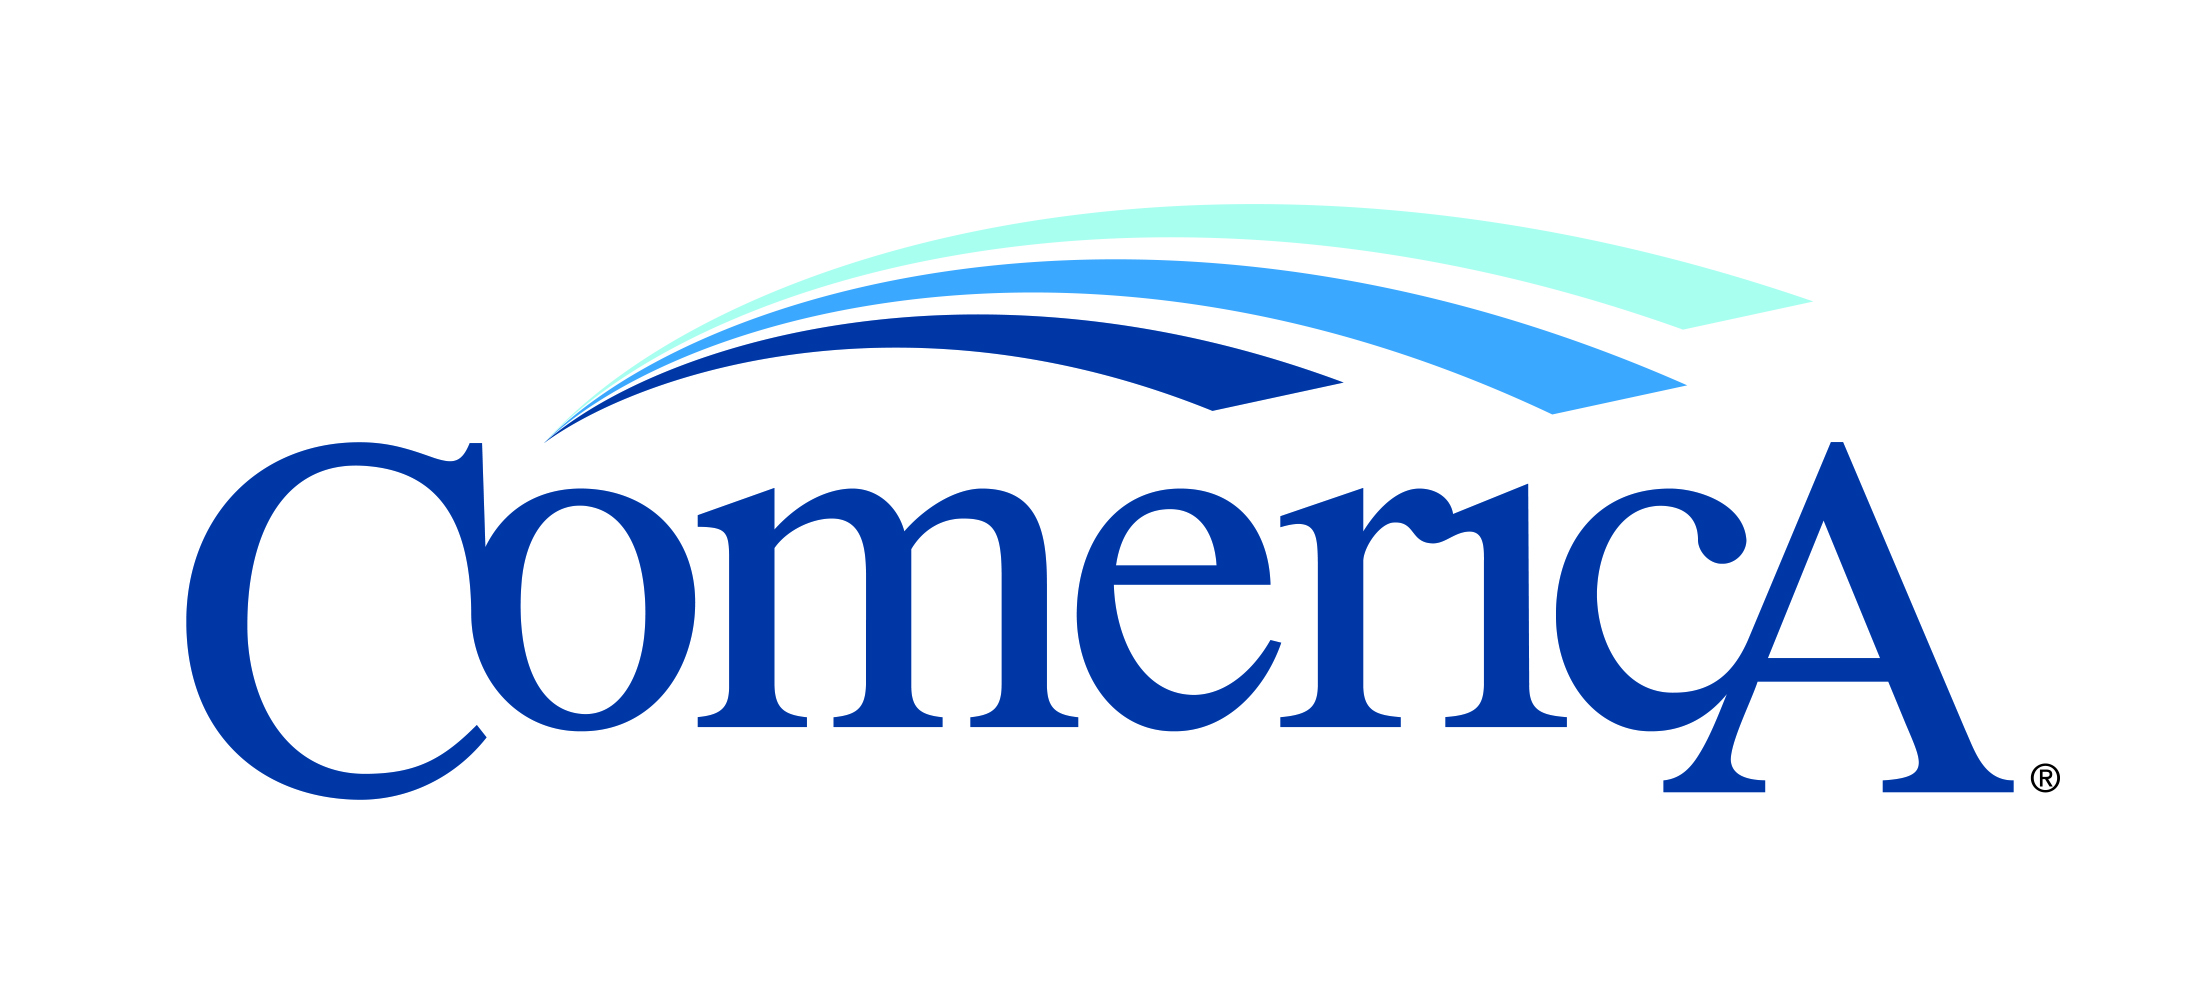 Comerica Bank logo: the word Comerica in flowing blue letters with a green highlight